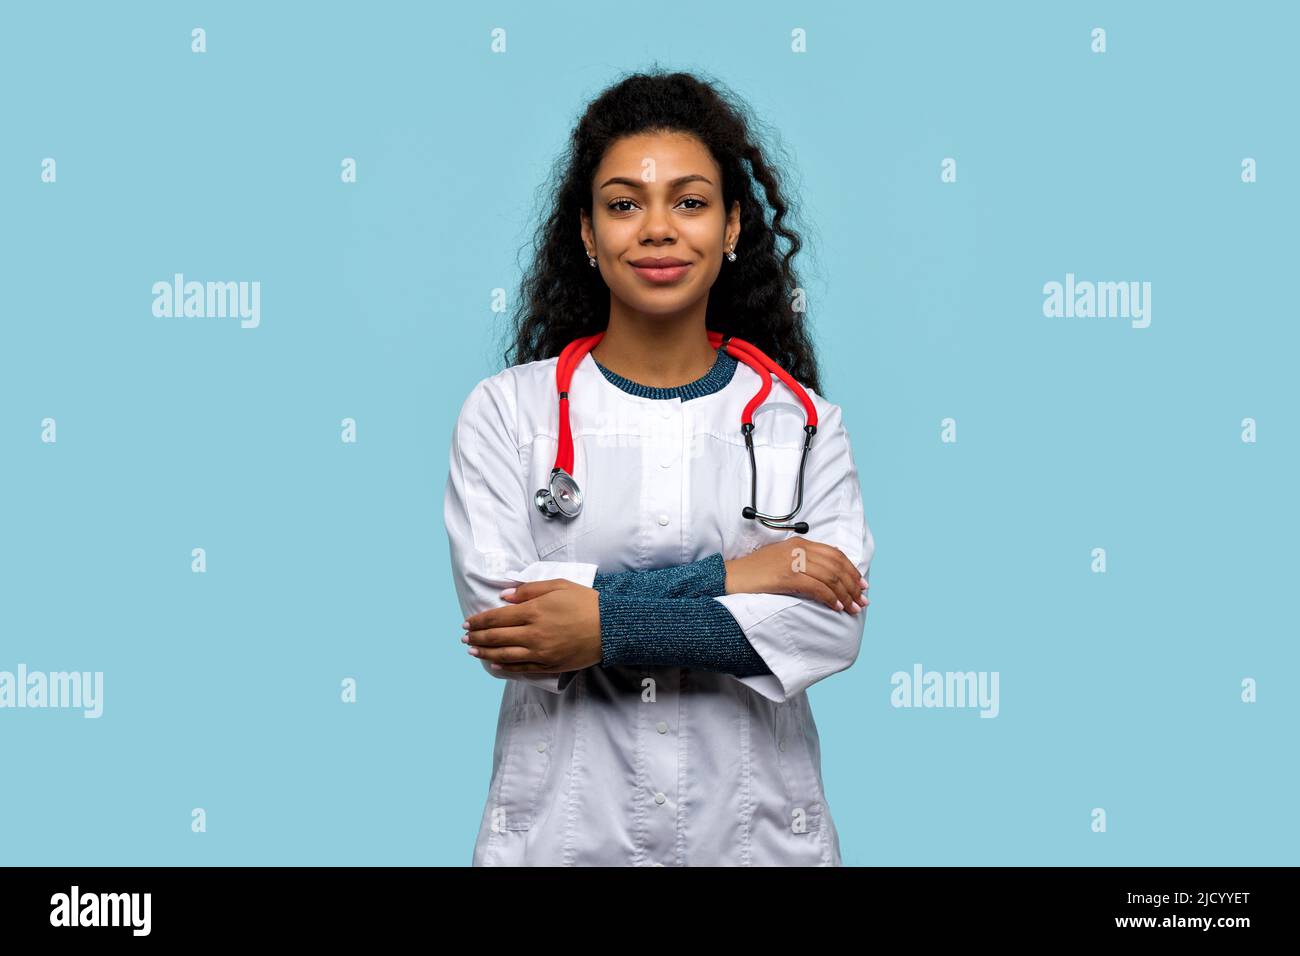 Portrait Positive Non-Caucasian Skinned Woman Doctor with crossed Arms Smiling Looking at Camera on Blue Studio Wall. African American Female Medical Stock Photo